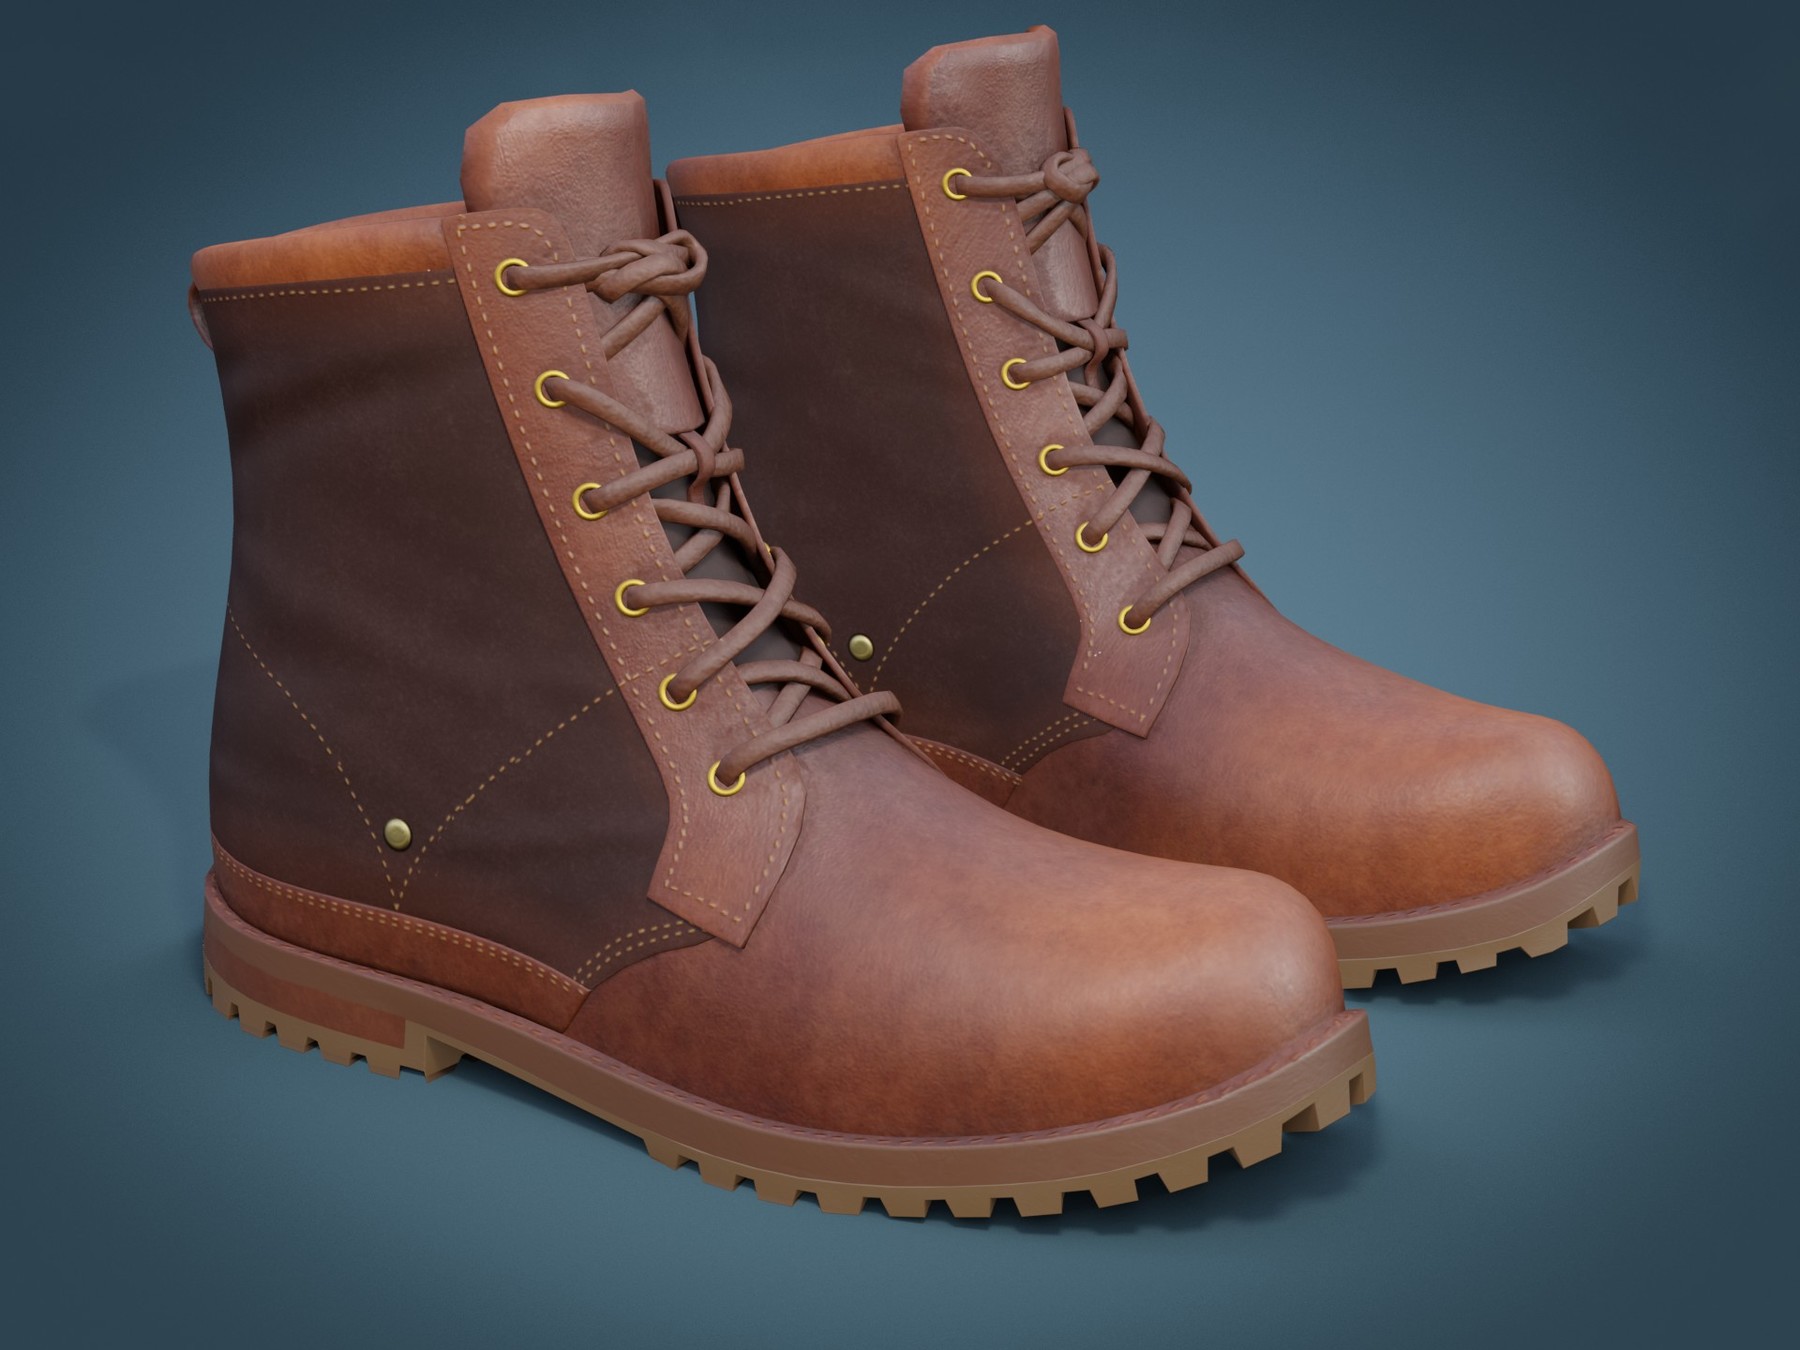 ArtStation - Old Leather Boots | Resources